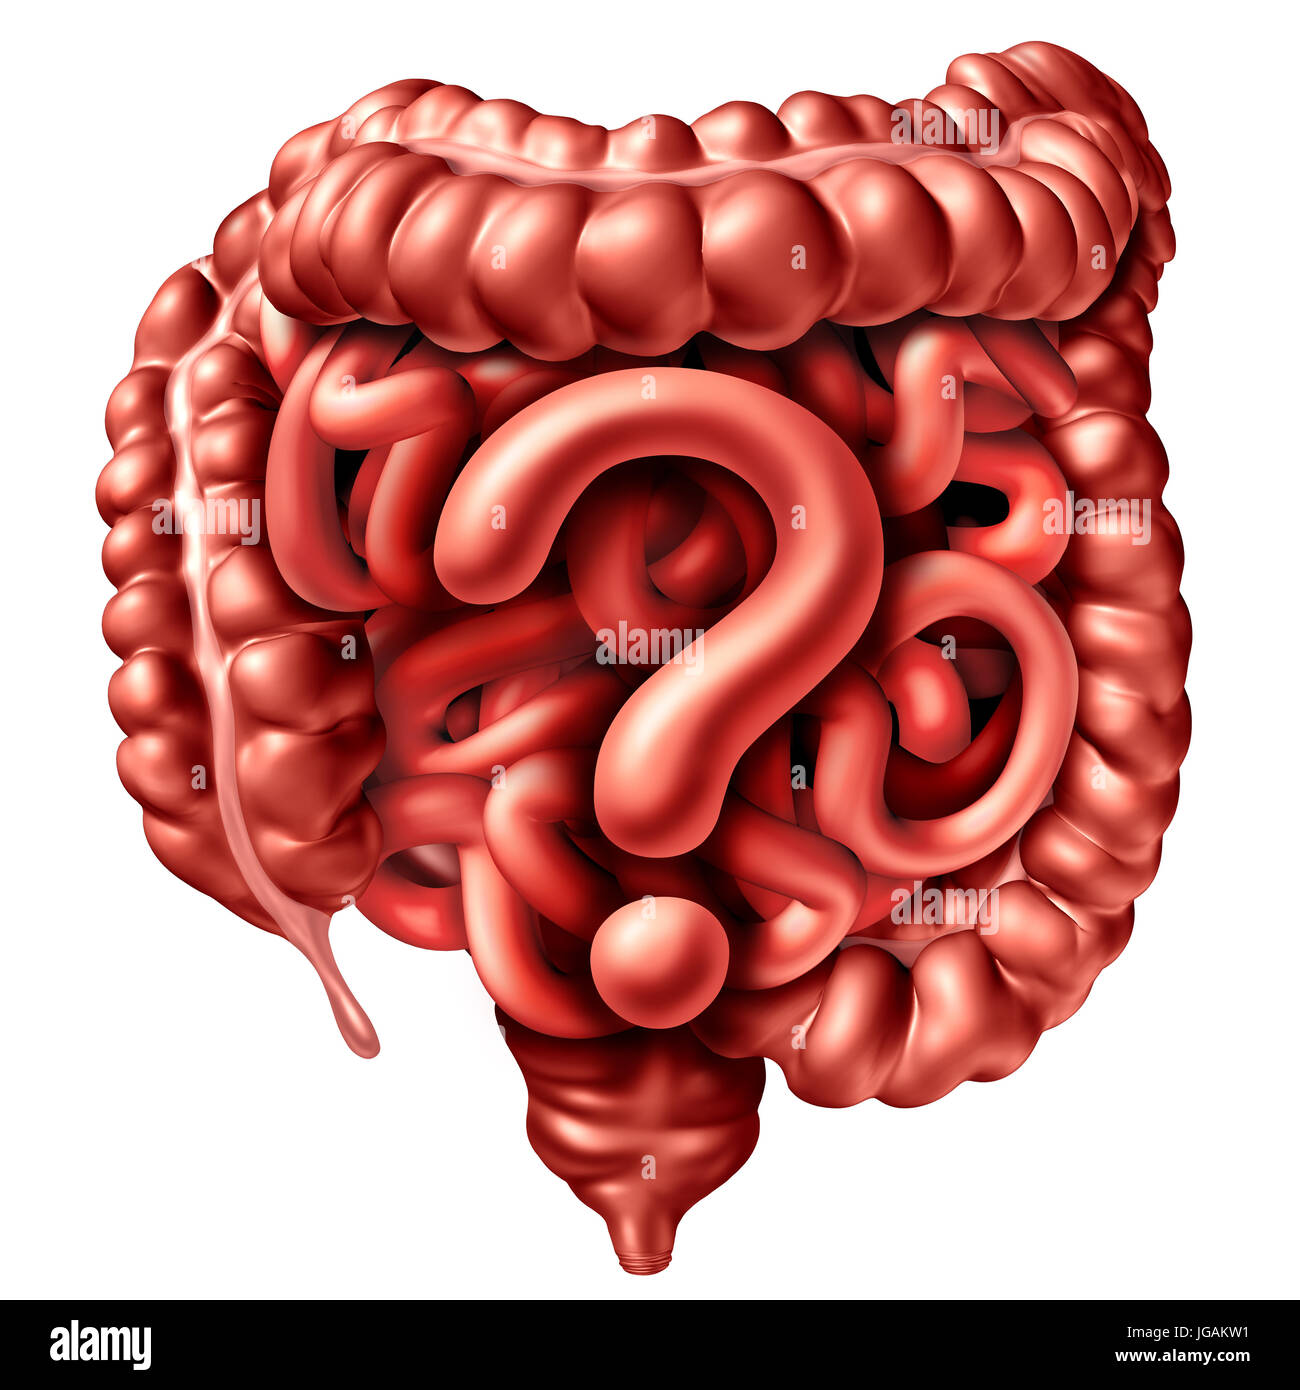 Digestion questions as the human intestine and colon shaped as a gastrointestinal question mark as a symbol for colonoscopy. Stock Photo